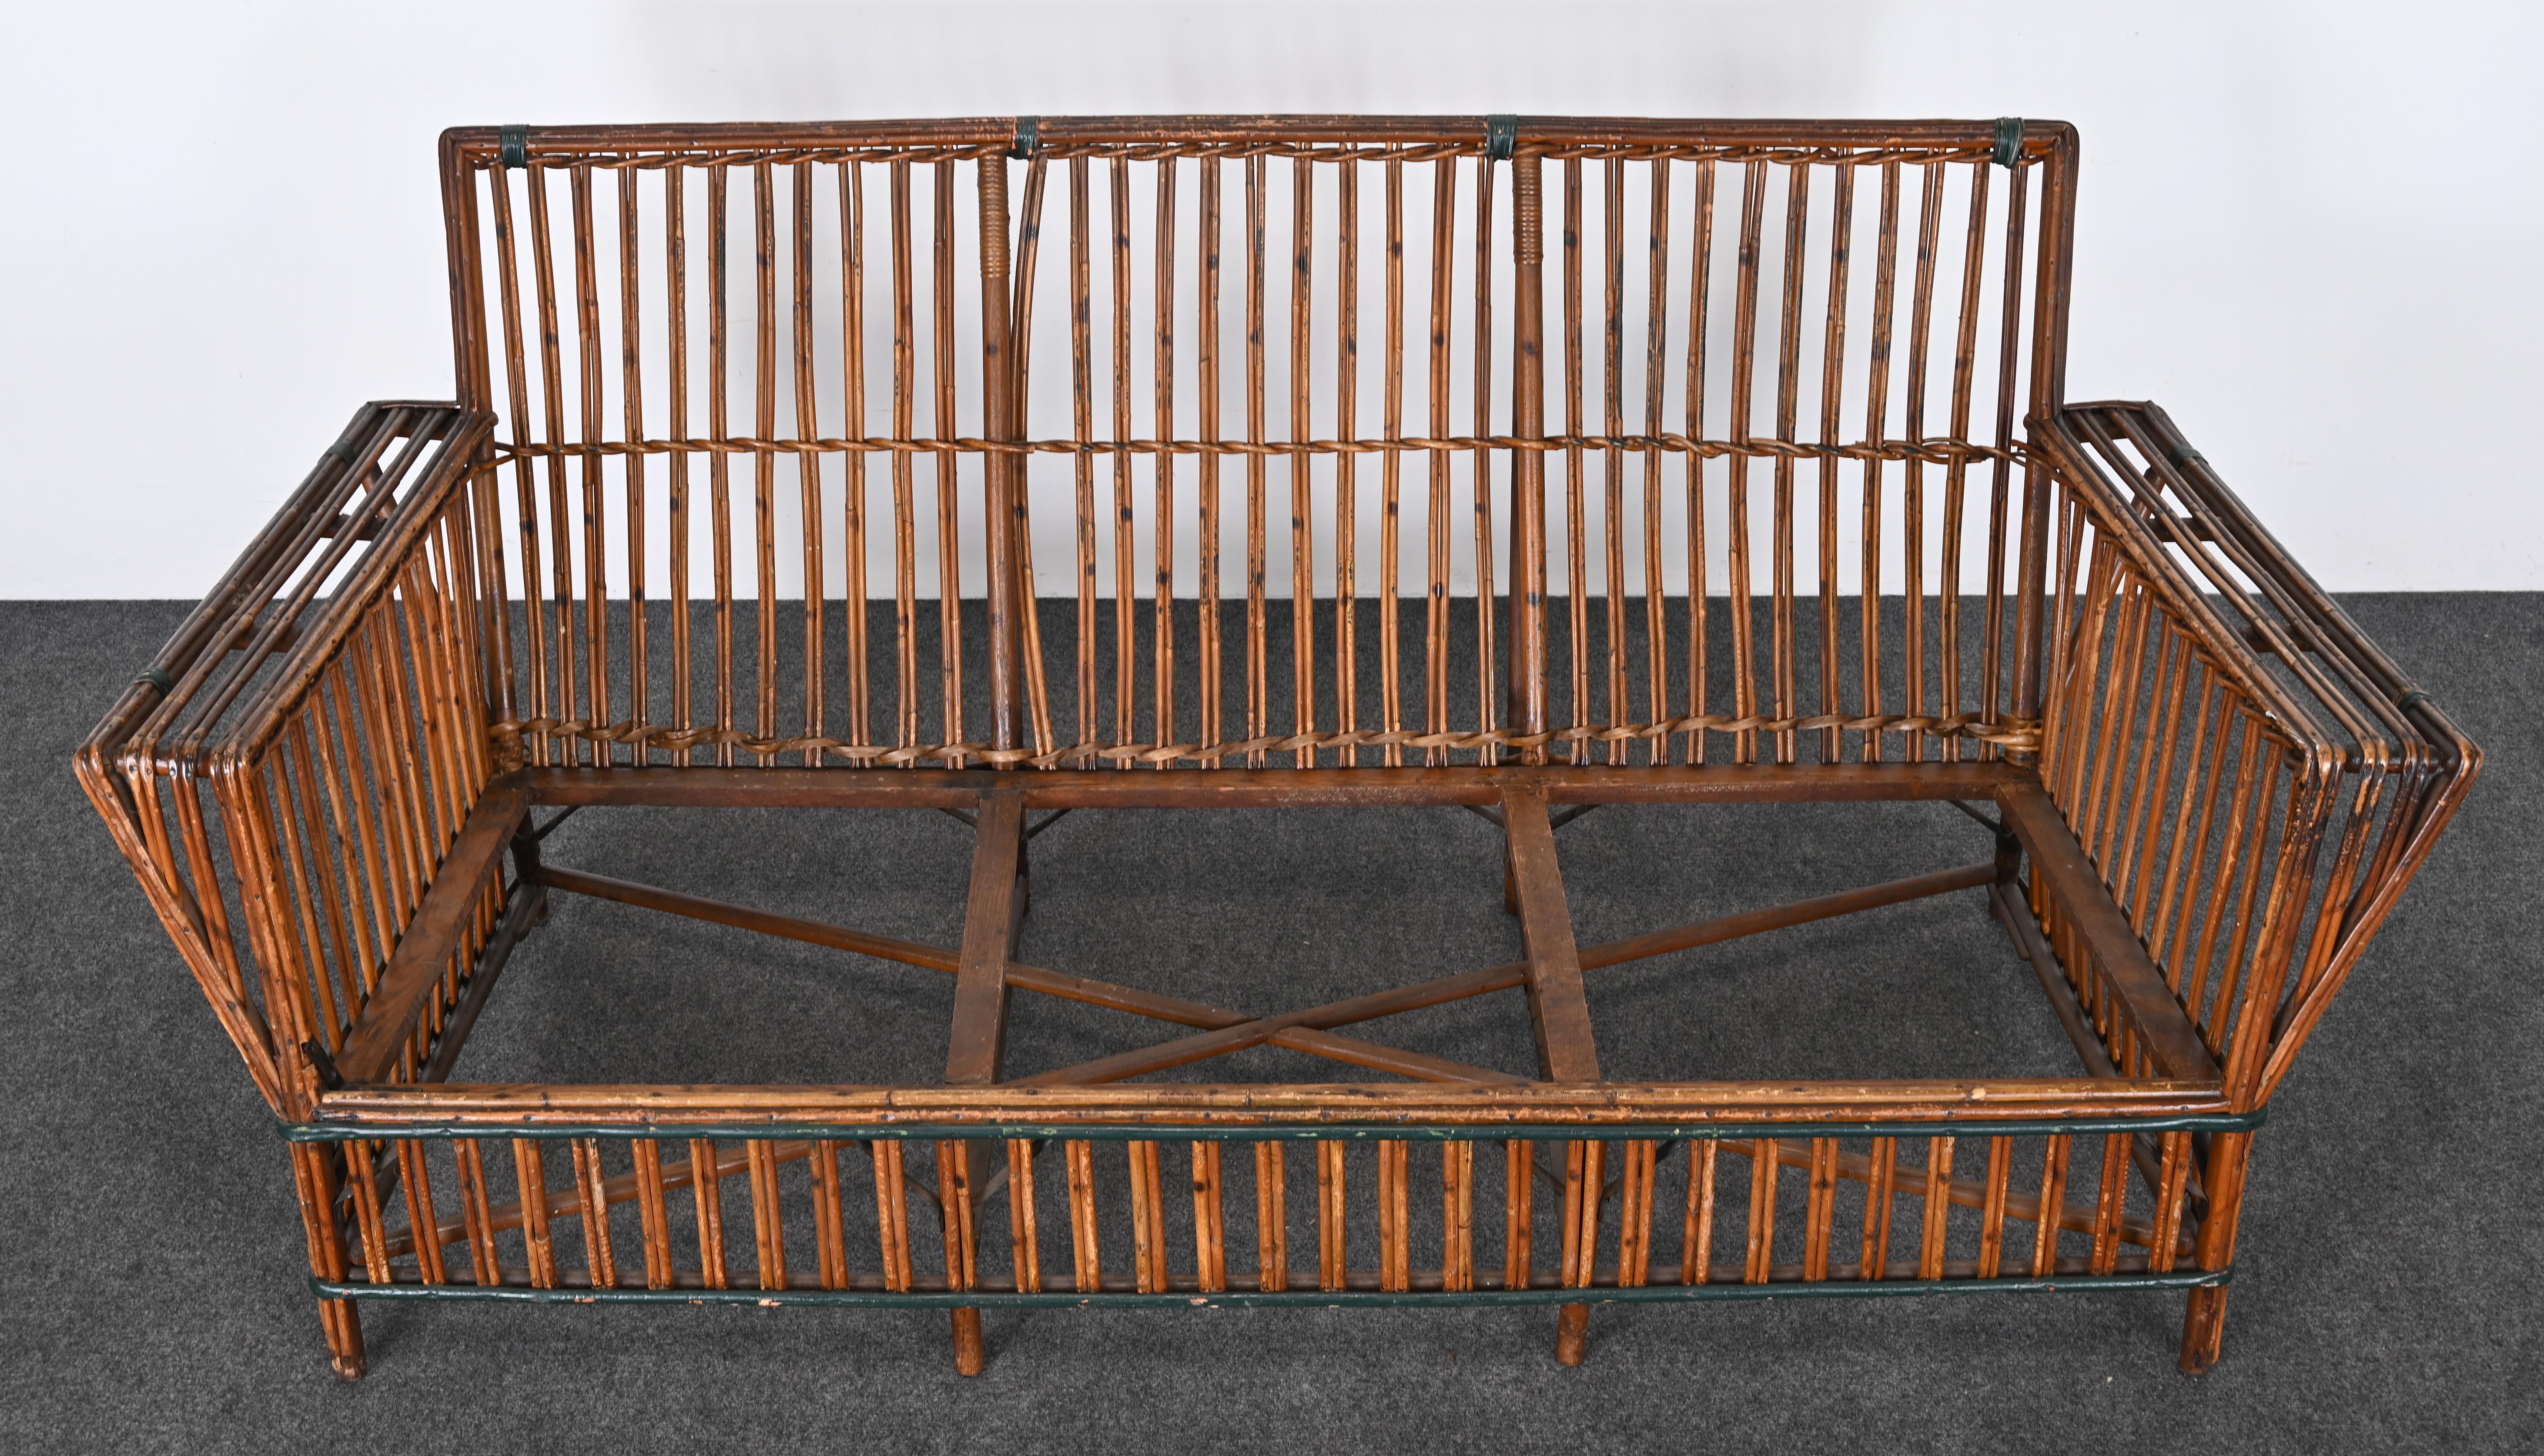 Art Deco Split Ypsilanti Stick Reed Wicker or Sofa with Pair Arm Chairs c. 1930s For Sale 10